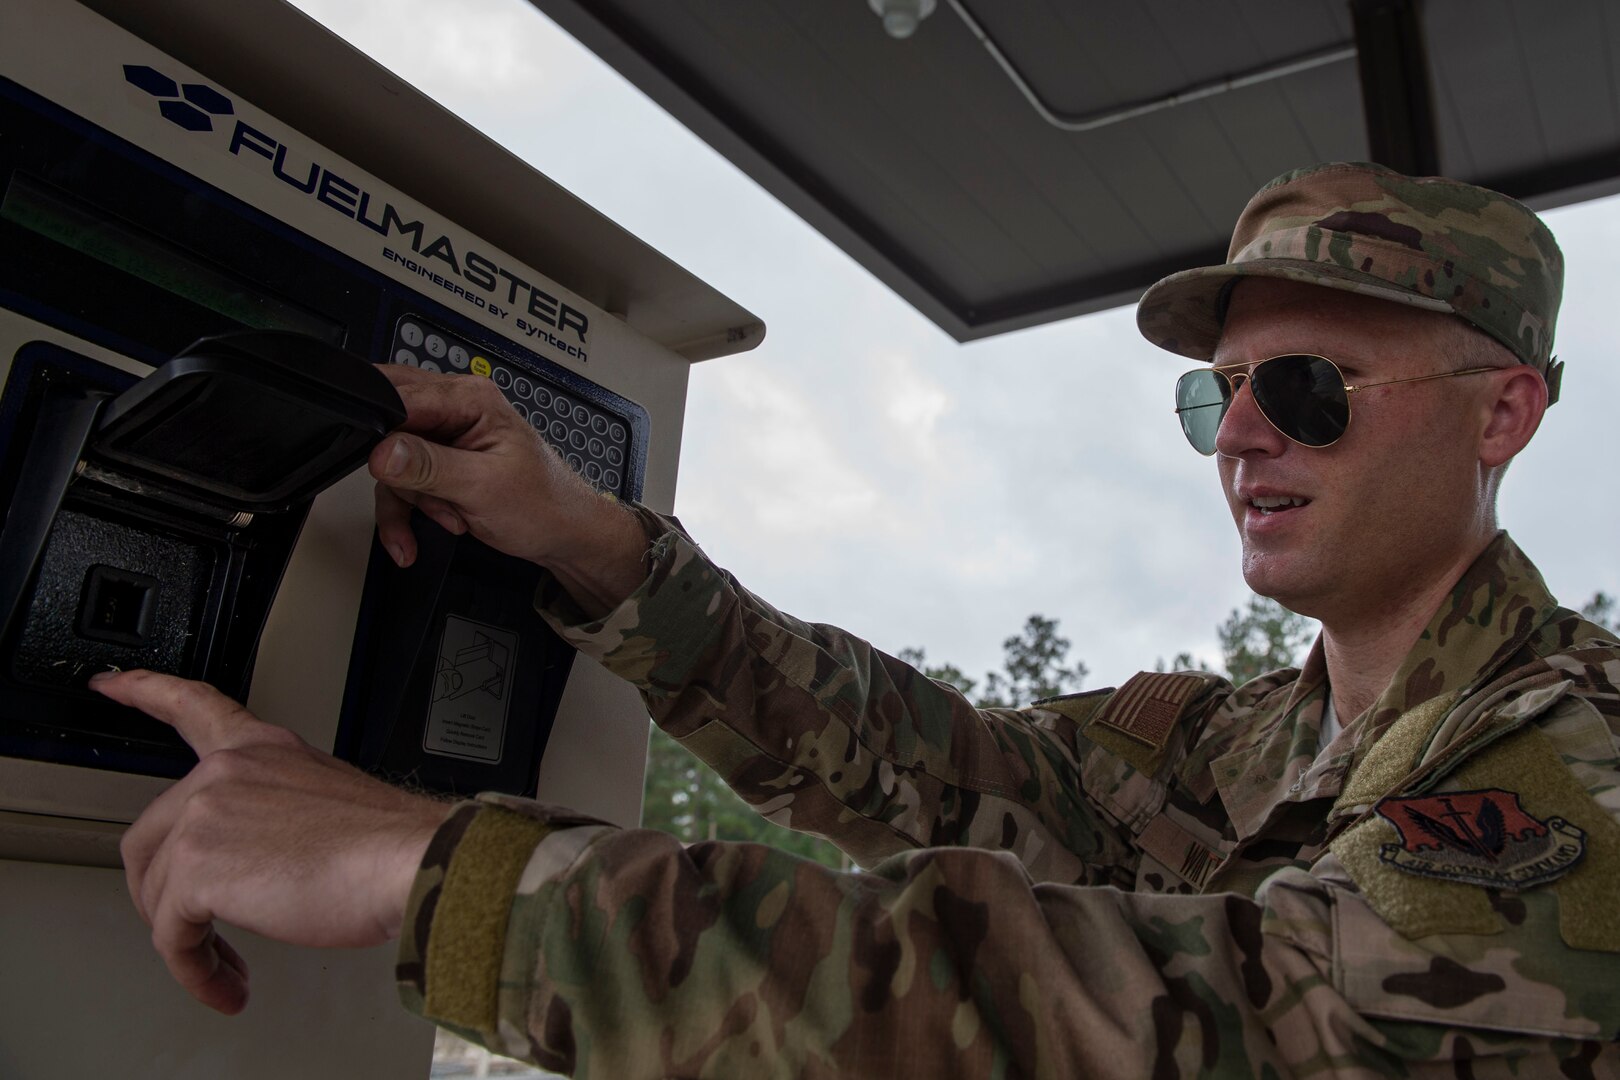 Staff Sgt. Bryan White, 23d Logistics Readiness Squadron (LRS) fuels facilities NCO in charge, checks a vehicle interface link socket for damage Oct. 30, 2019, at Moody Air Force Base, Ga. The 23d LRS fuels facilities is responsible for maintaining facilities, product purity, storage and accountability. Fuels facilities Airmen maintain the base service station by performing routine checks on the operating valves, fuel tanks and service station parts. (U.S. Air Force photo by Airman Azaria E. Foster)